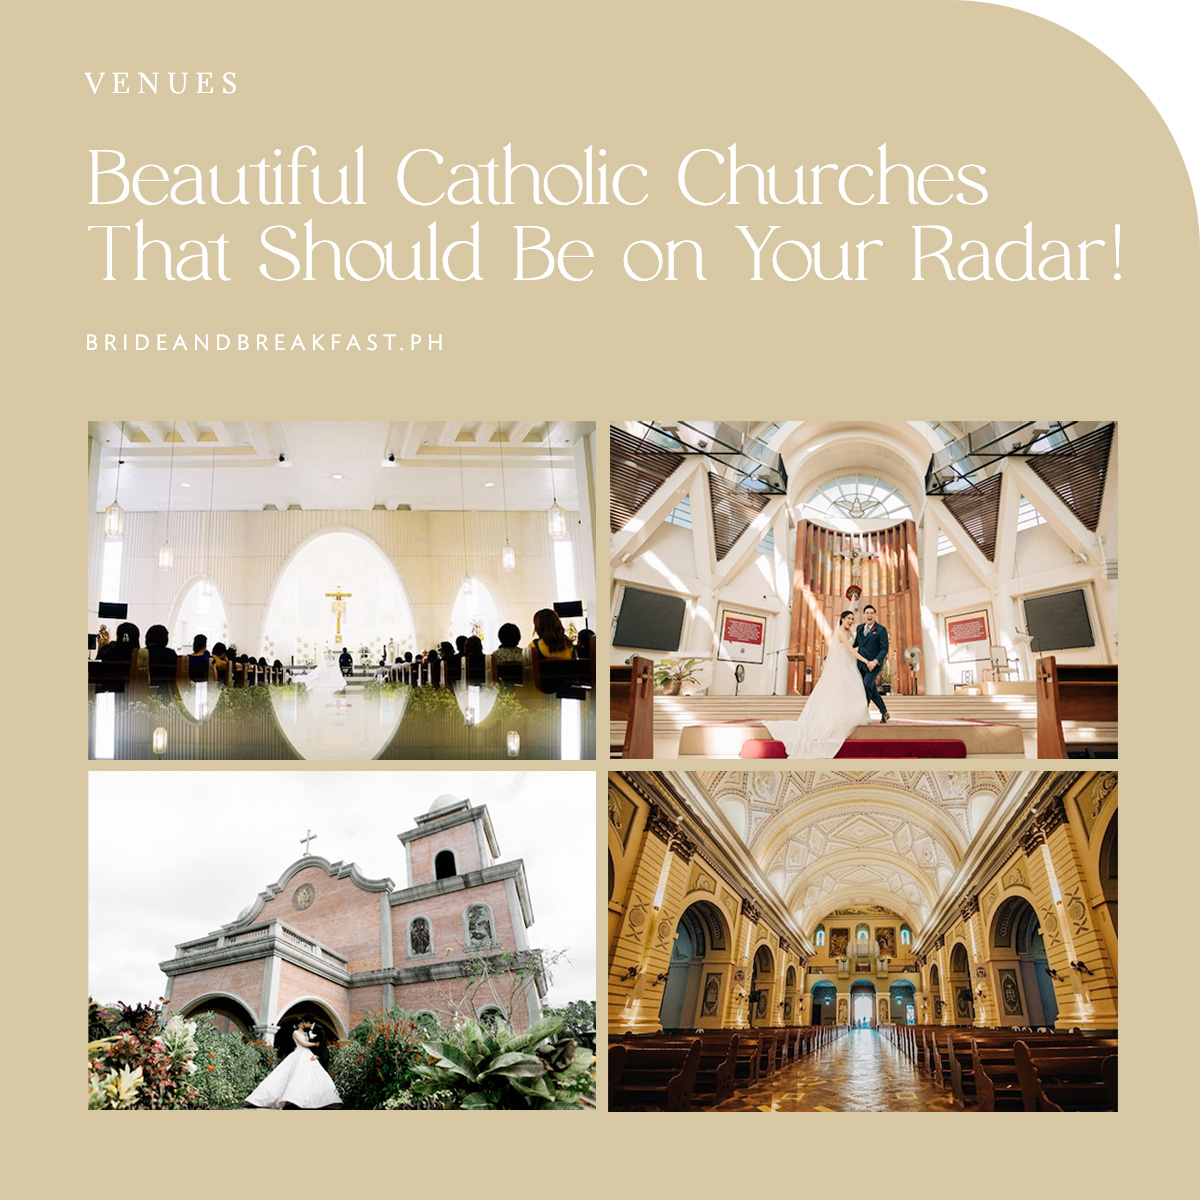 Beautiful Catholic Churches That Should Be on Your Radar!